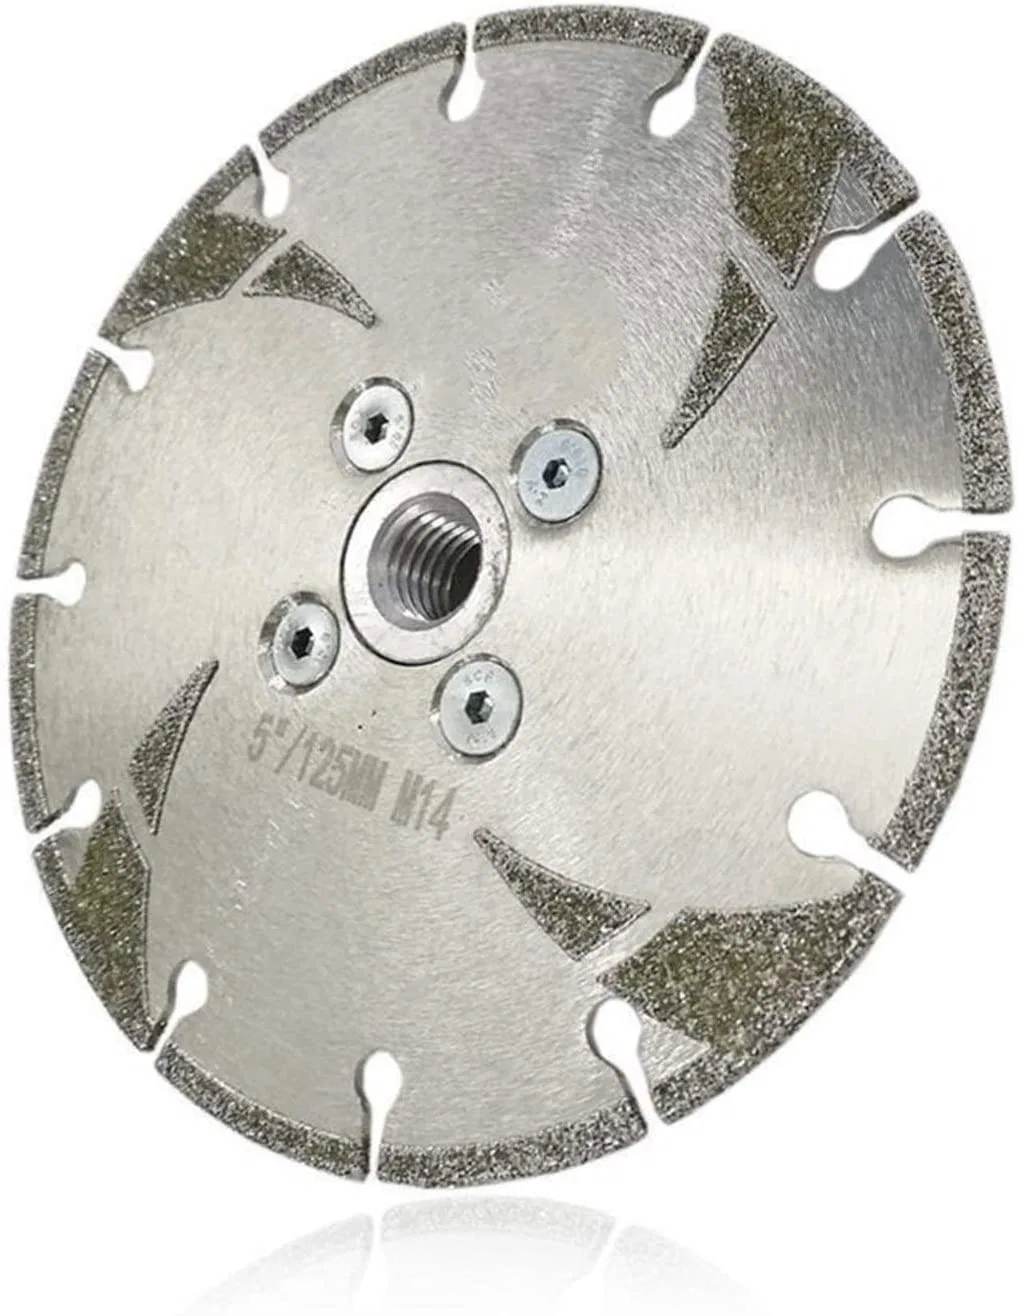 5" Coated Diamond Cutting Grinding Disc M14 Flange with Protection 125mm Electroplated Diamond Saw Blade Hardware Tools Silver Coated